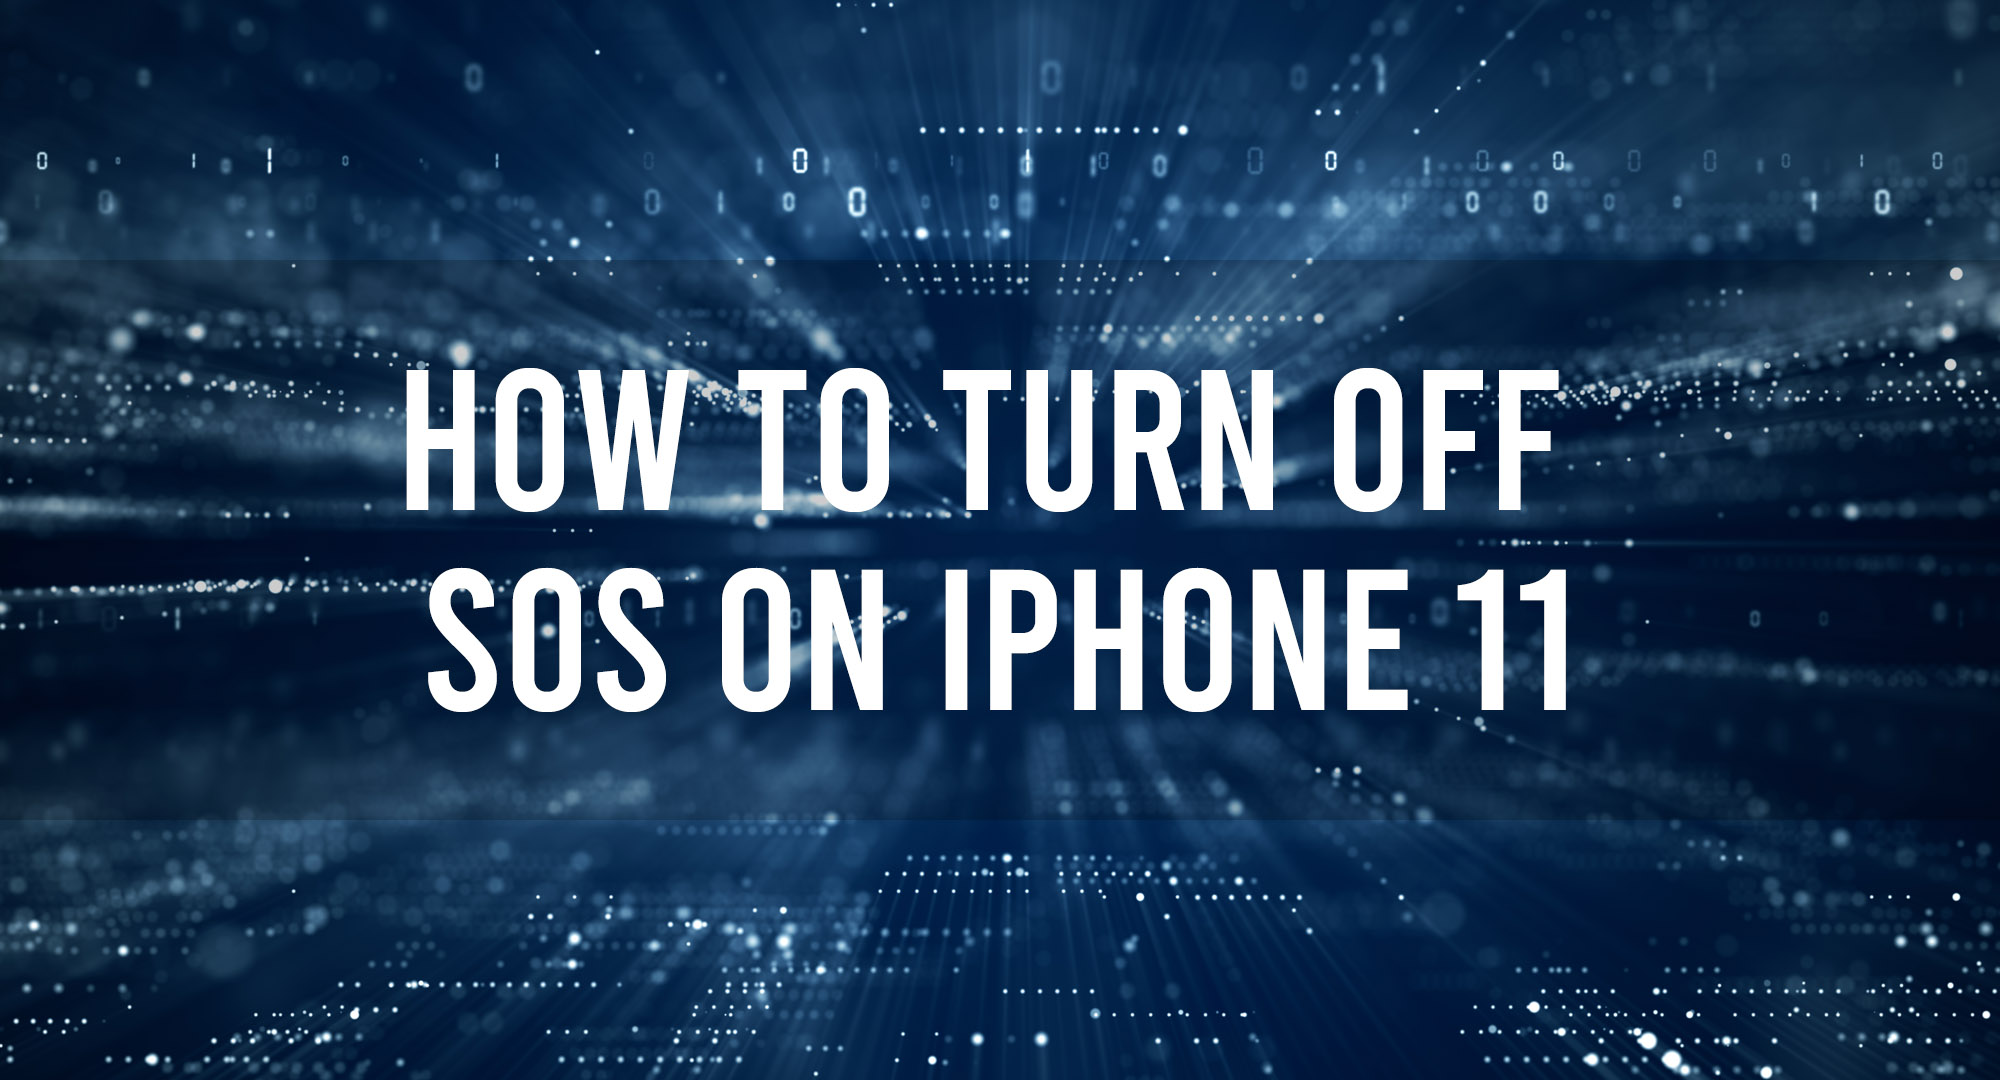 How to Turn Off SOS on iPhone 11